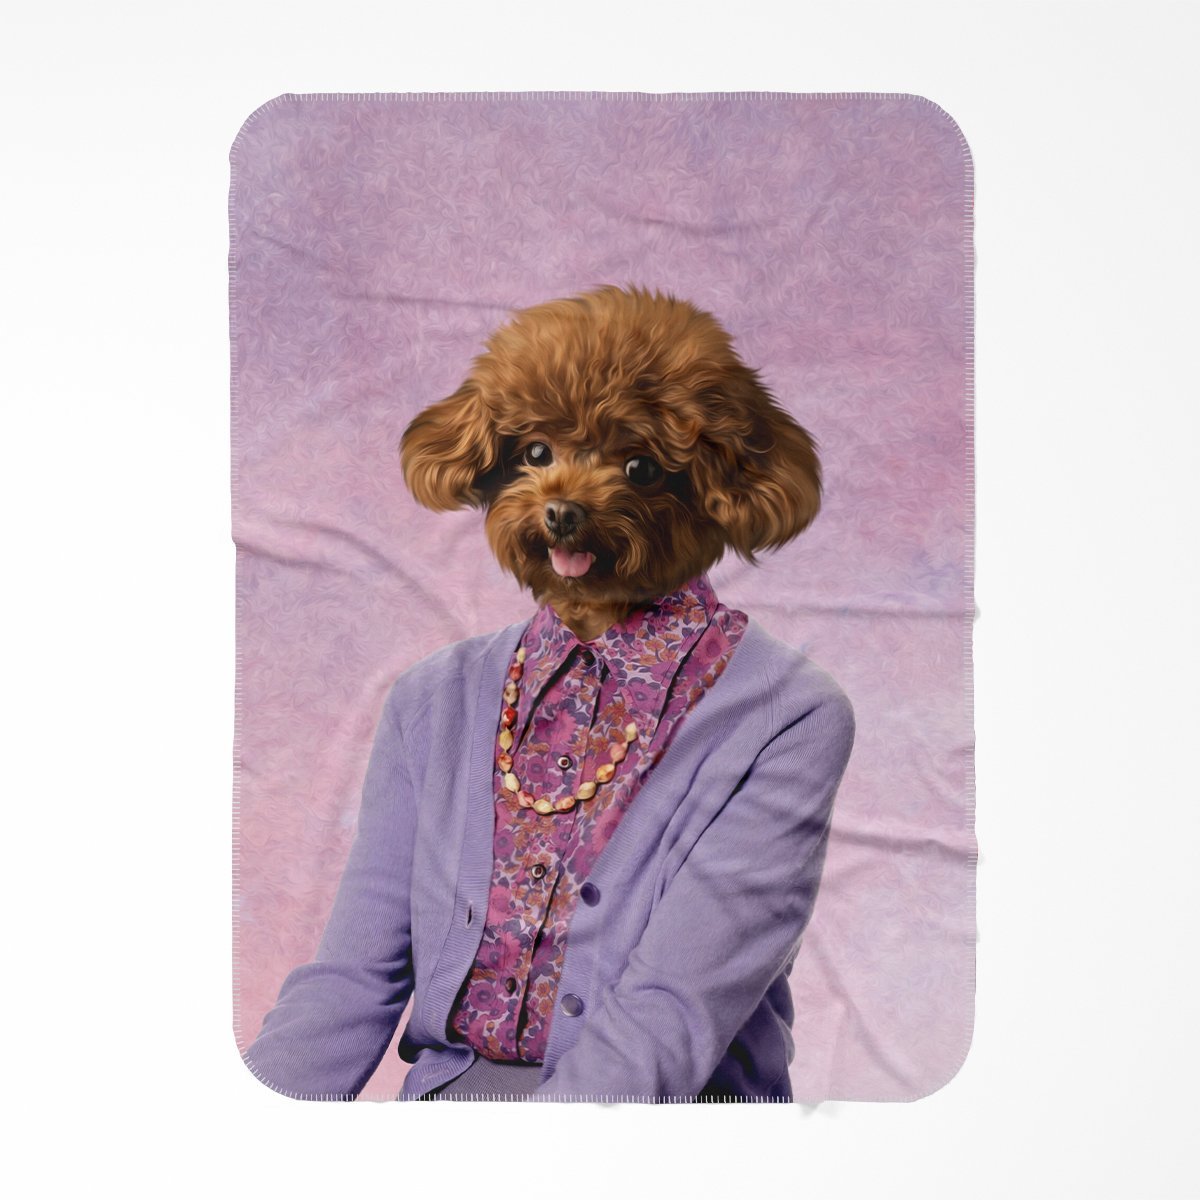 The Dot Cotton (Eastenders Inspired): Custom Pet Blanket - Paw & Glory - #pet portraits# - #dog portraits# - #pet portraits uk#Pawandglory, Pet art blanket,cheap pet blanket, small pet blanket, blankets with your dog's face on them, pets face on a blanket, dog face on a blanket